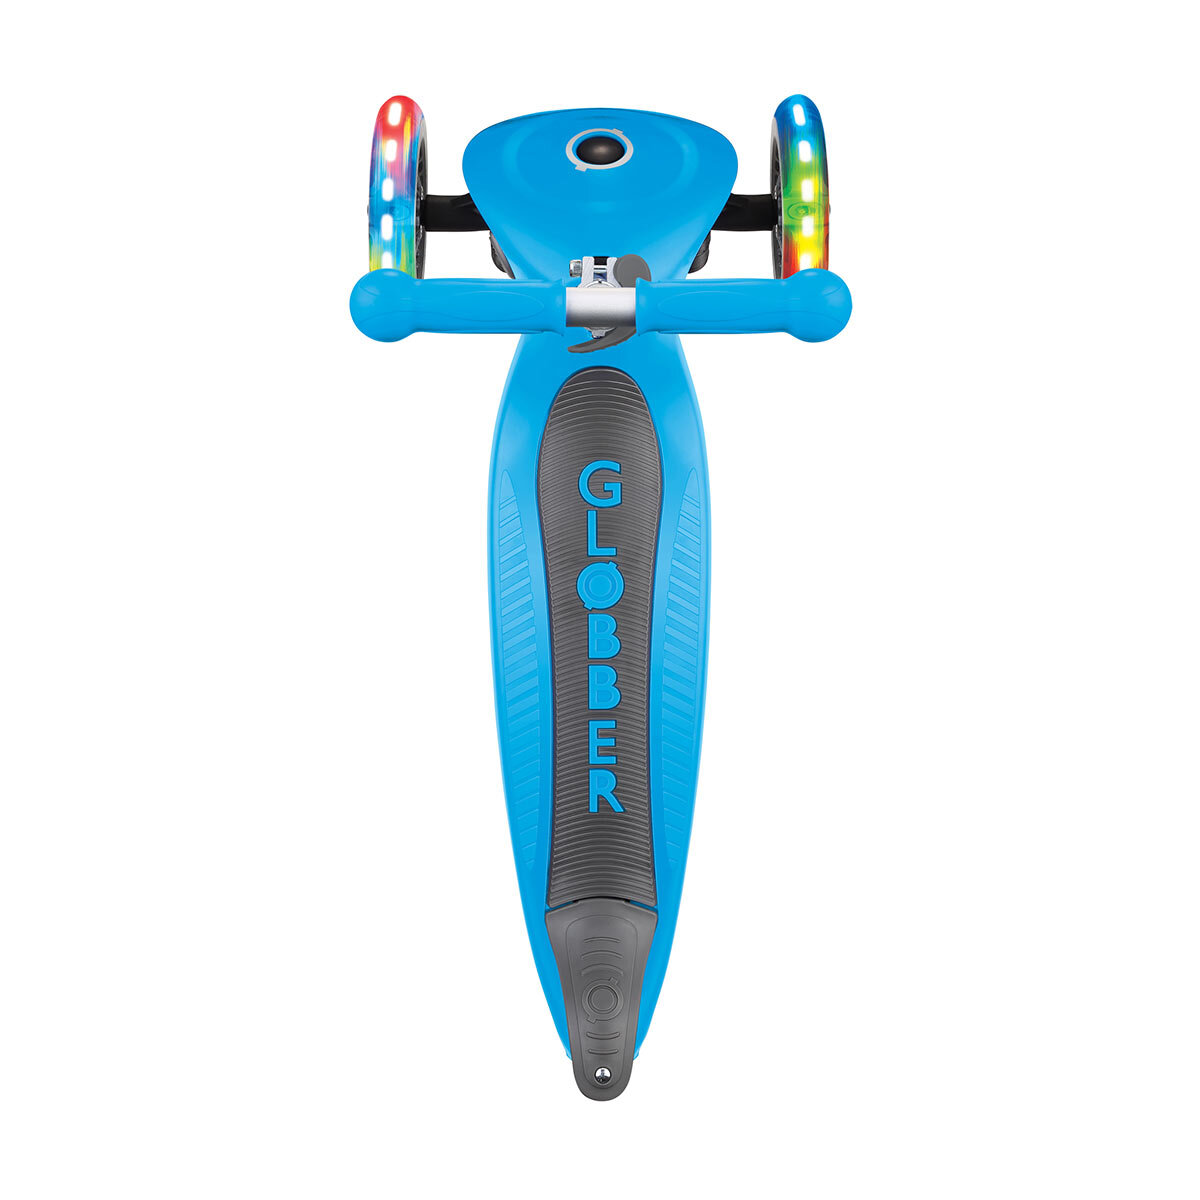 Buy Globber Primo Lights Scooter in Sky Blue 5 Image at Costco.co.uk